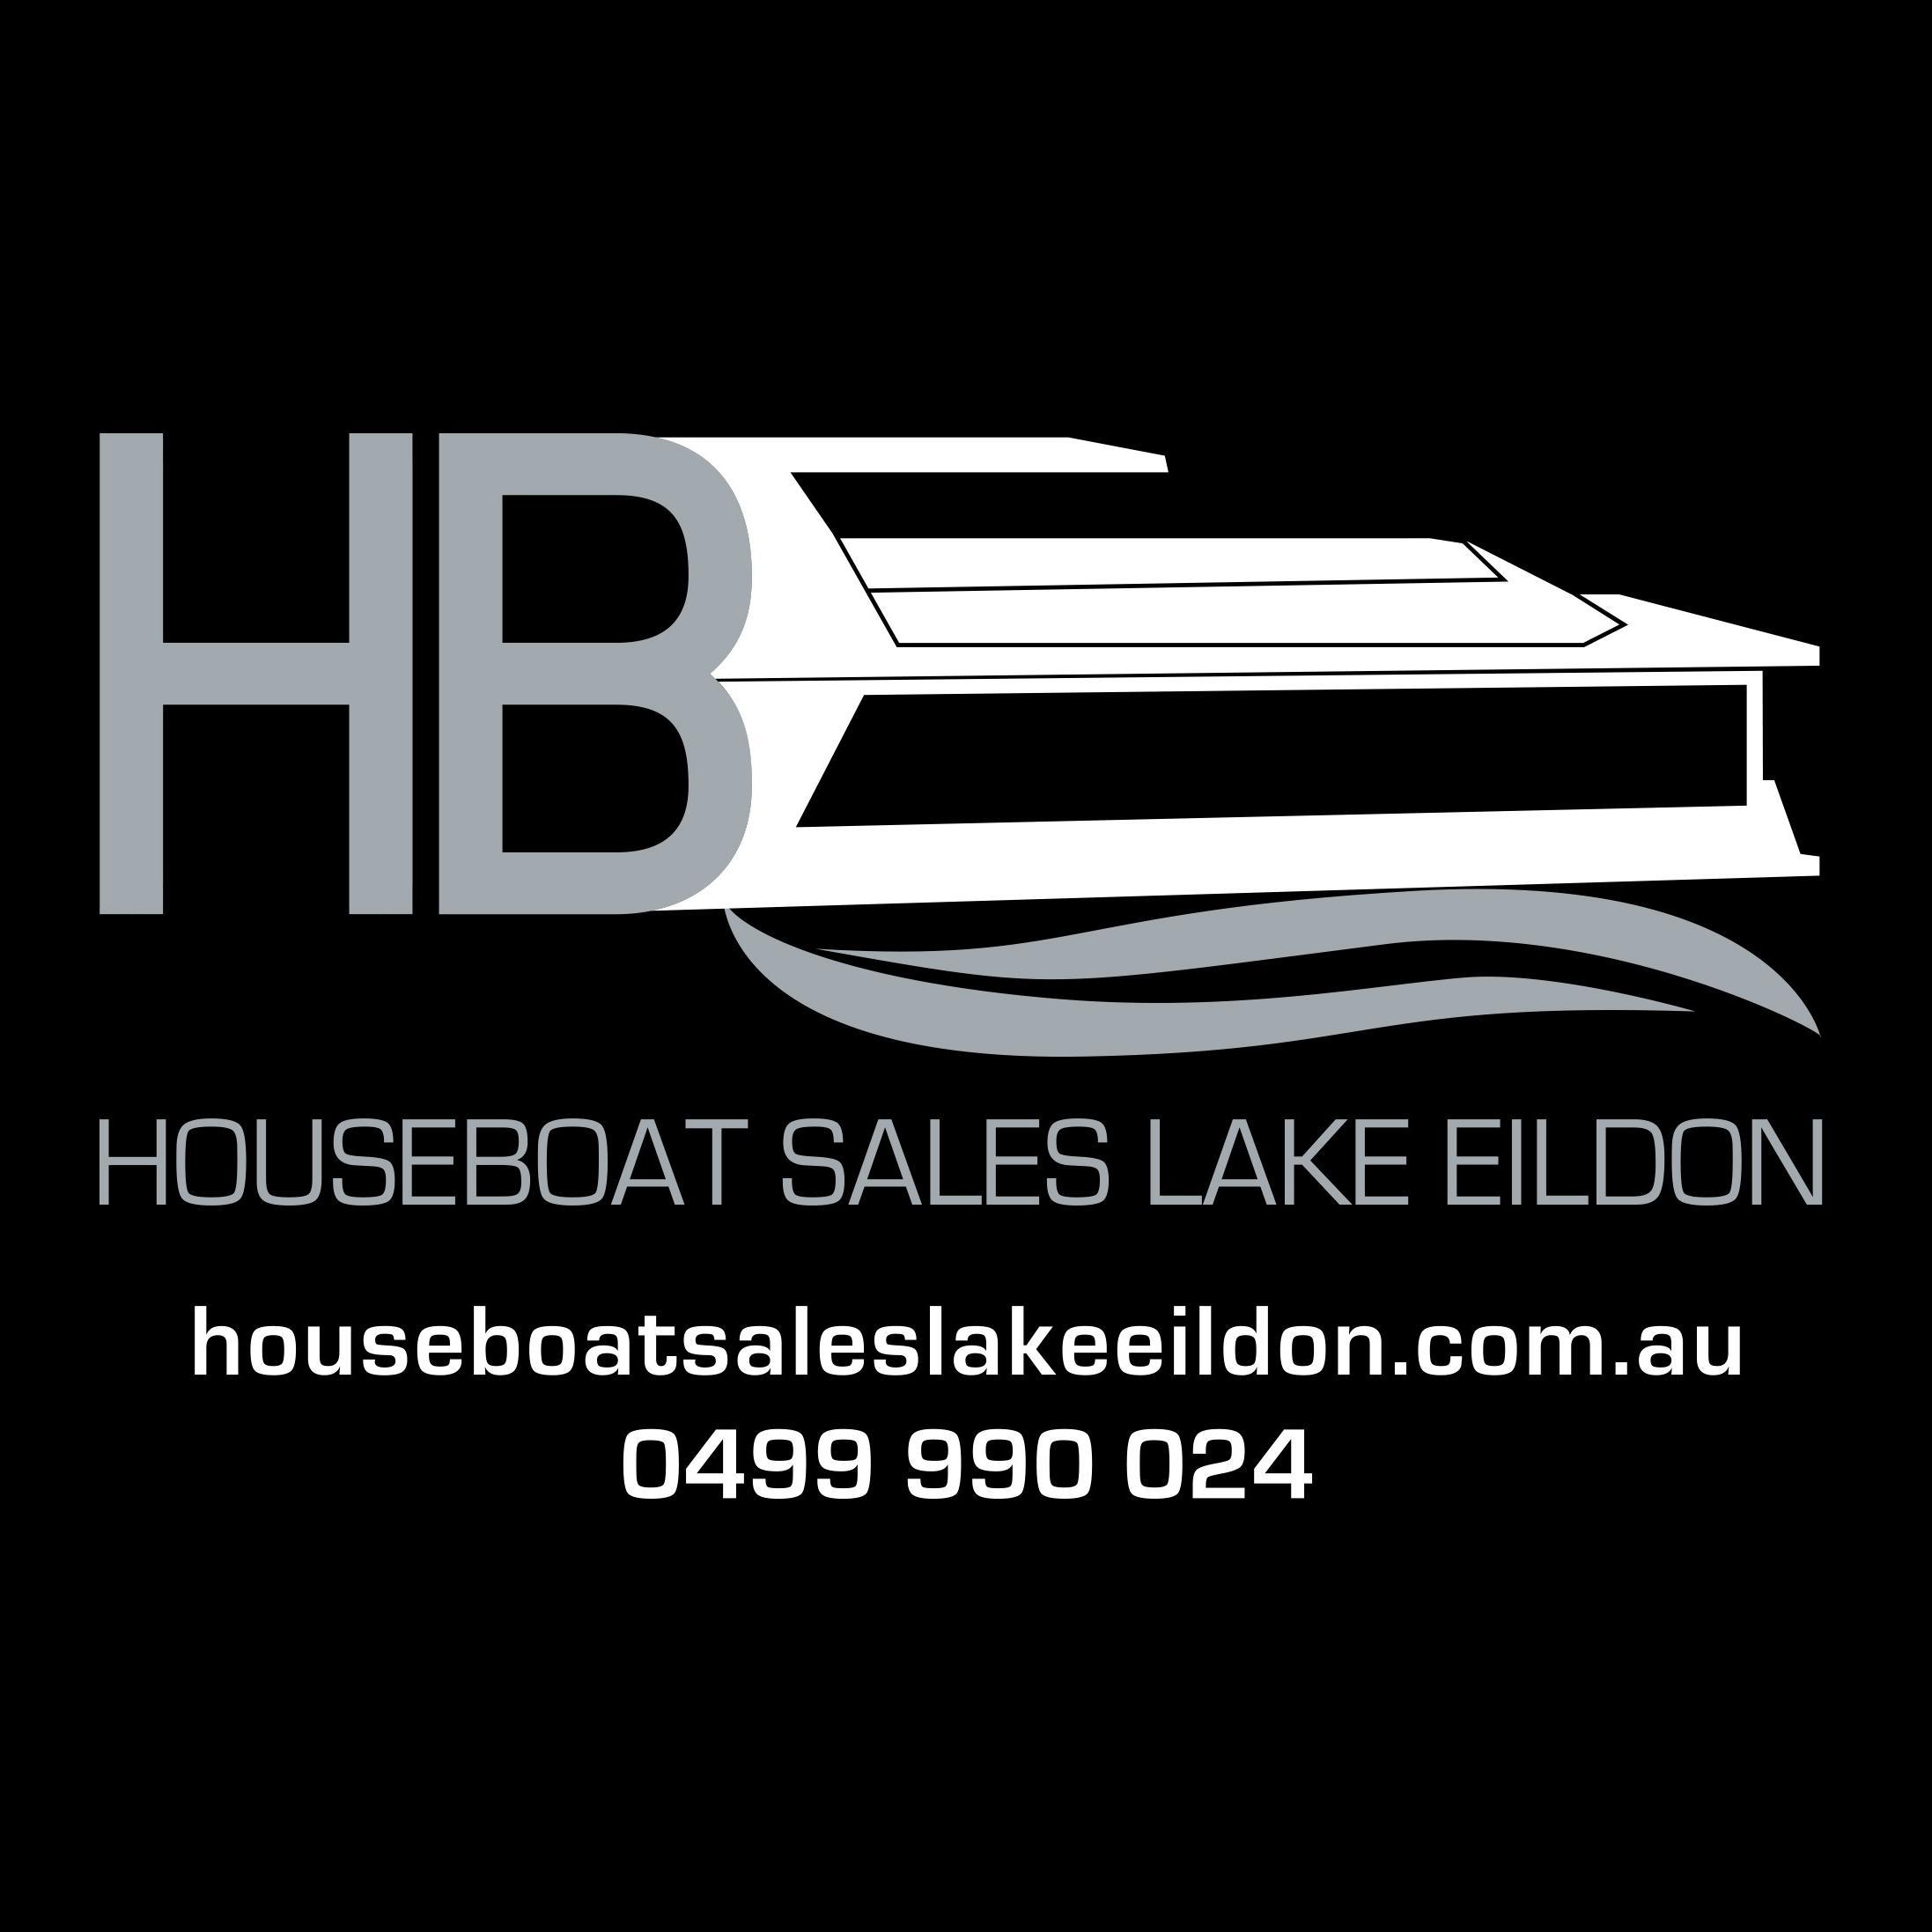 We have the largest range of house boats for sale on Lake Eildon to suit any budget and lifestyle, from entry level to the ultimate luxury mega houseboats.